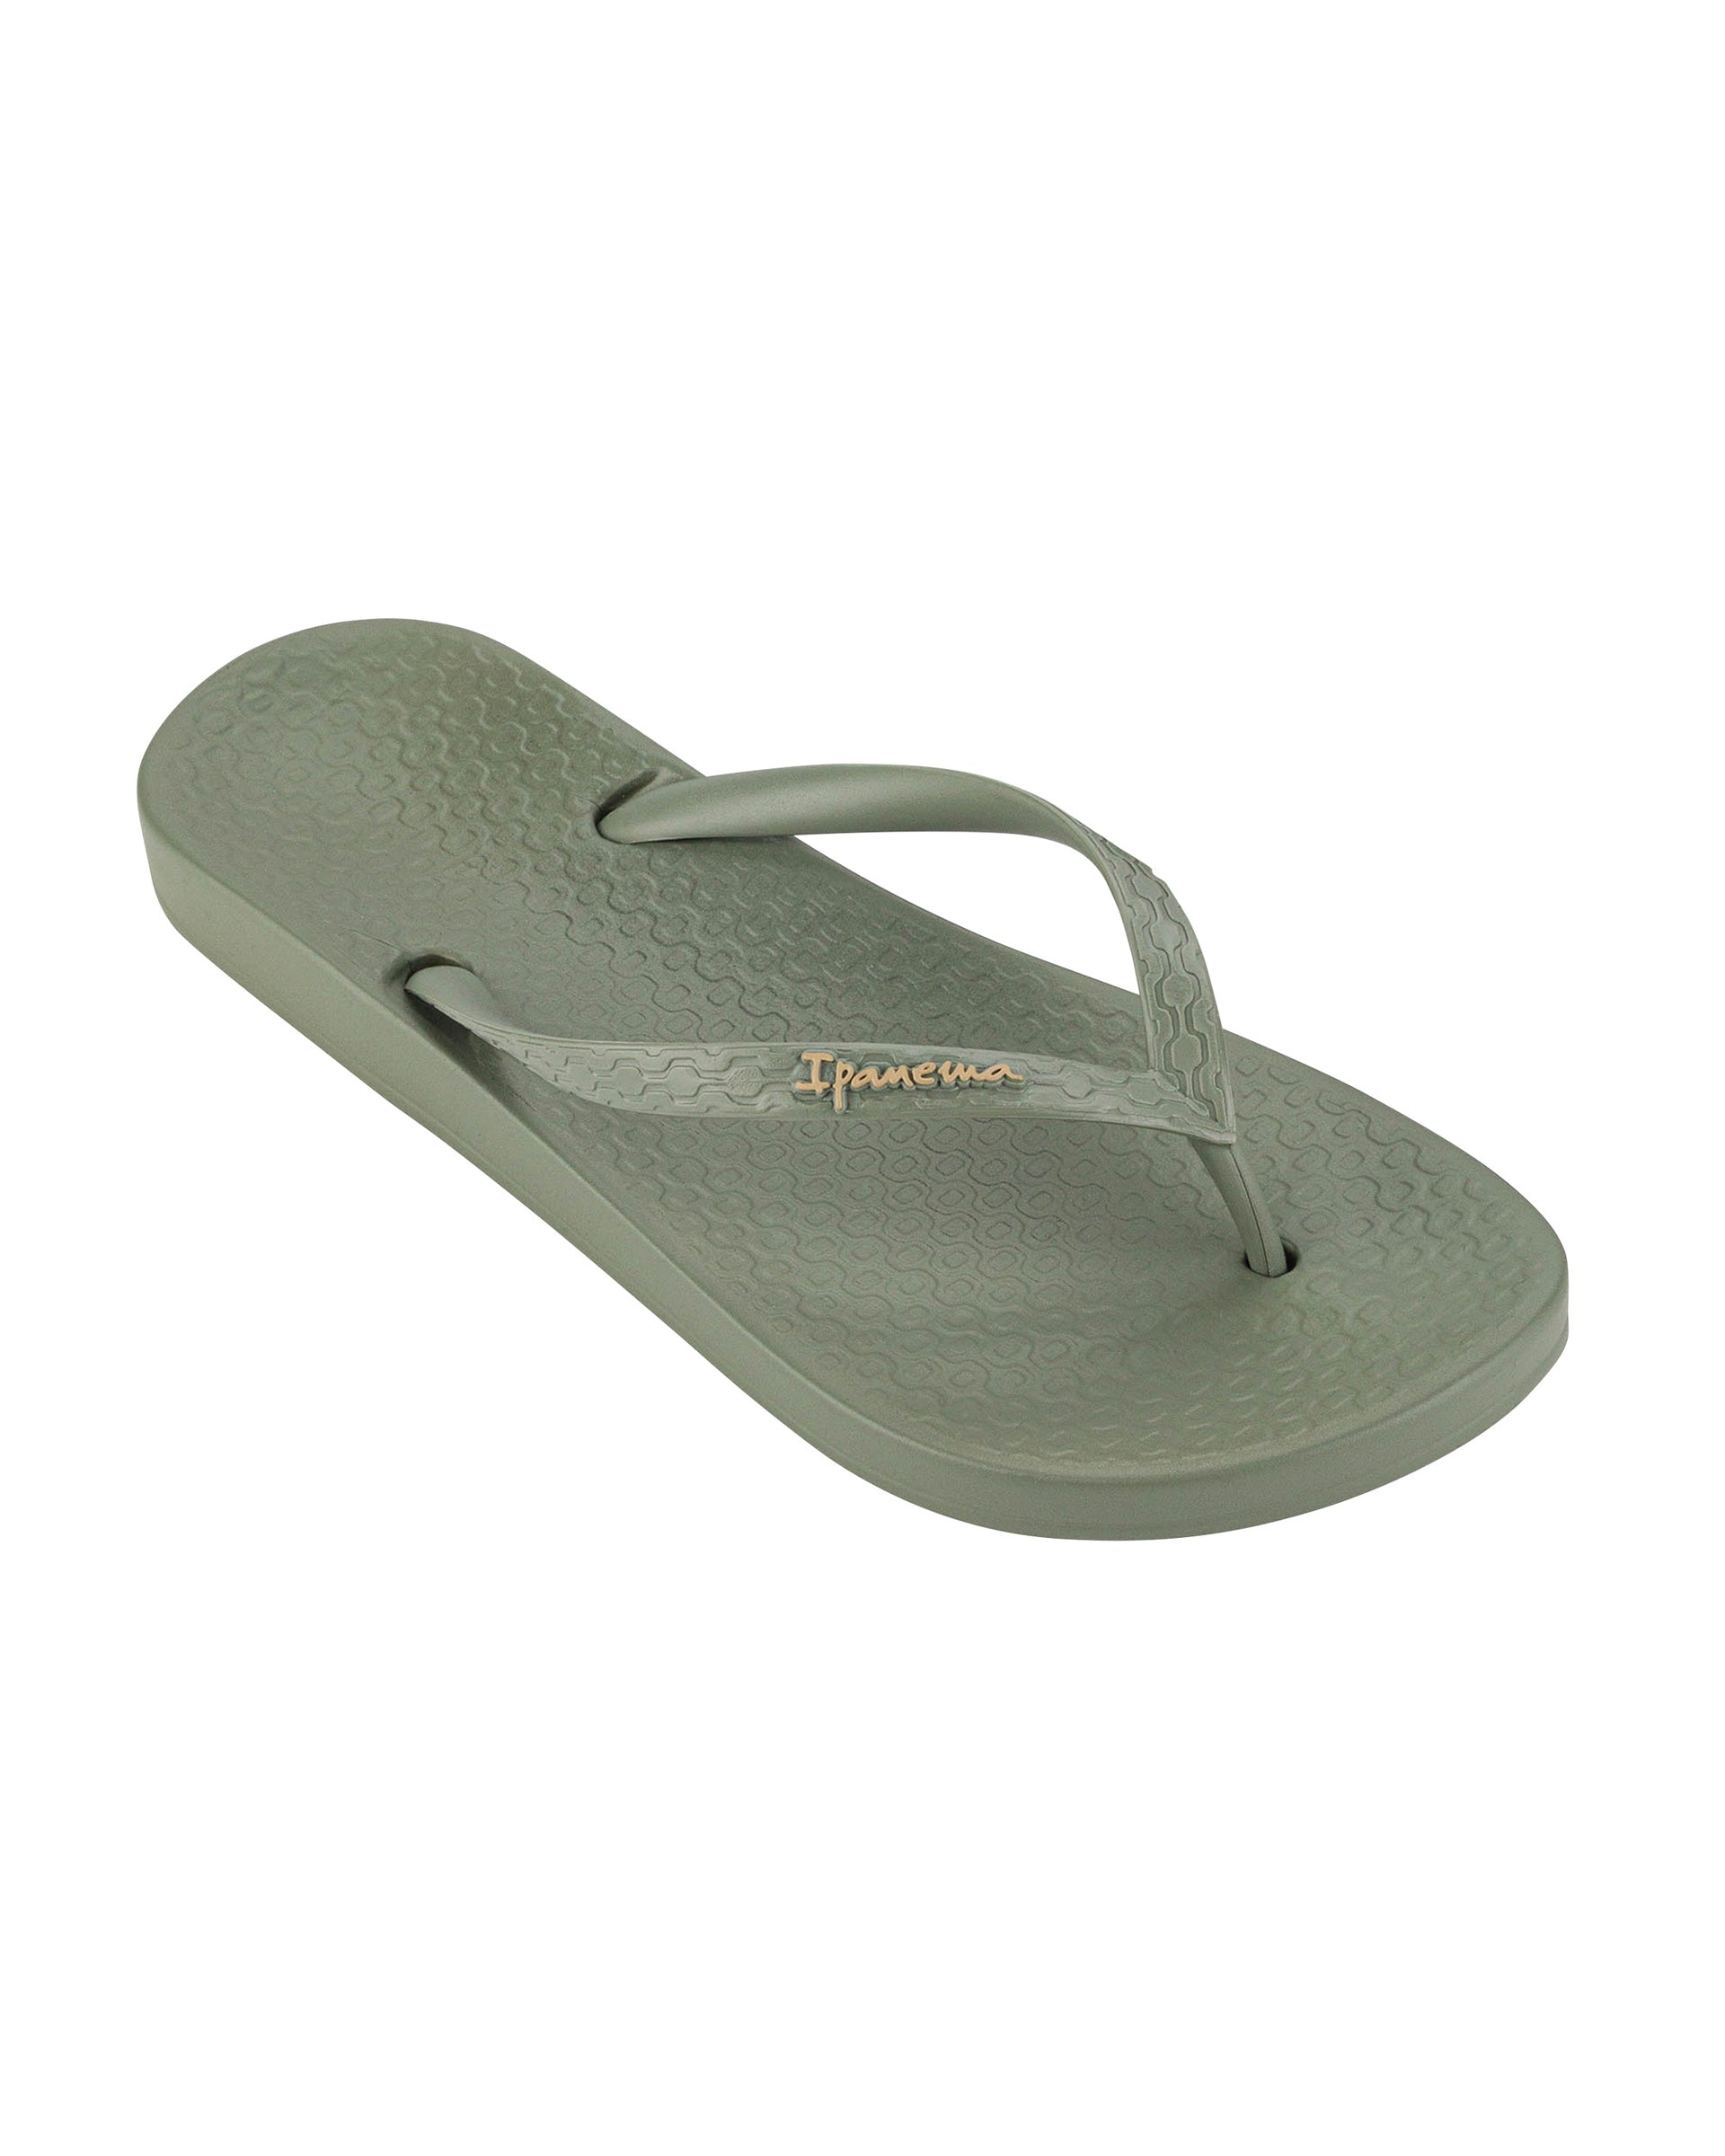 Angled view of a green Ipanema Ana Colors women's flip flop.